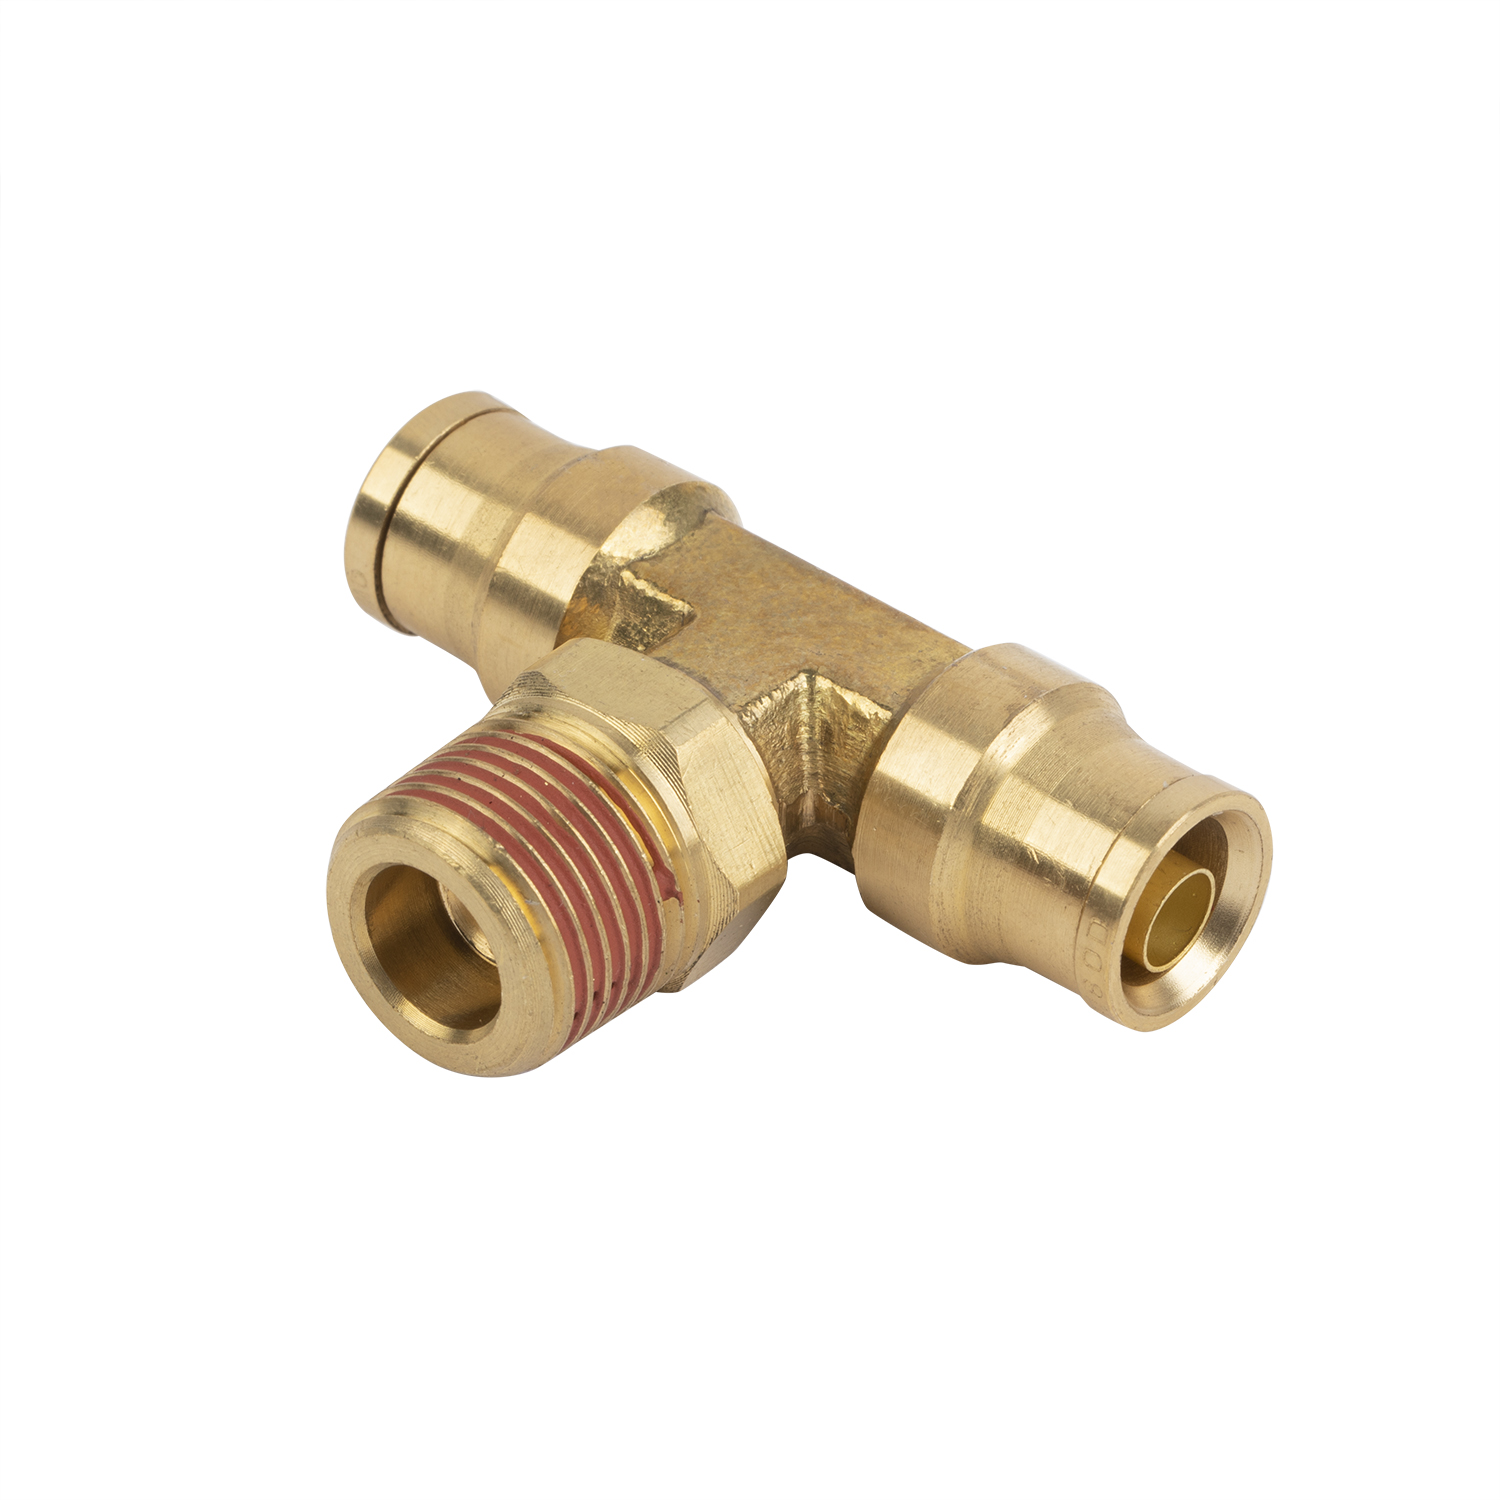 ZS900-1006:  D.O.T Male Branch Tee Adaptor 